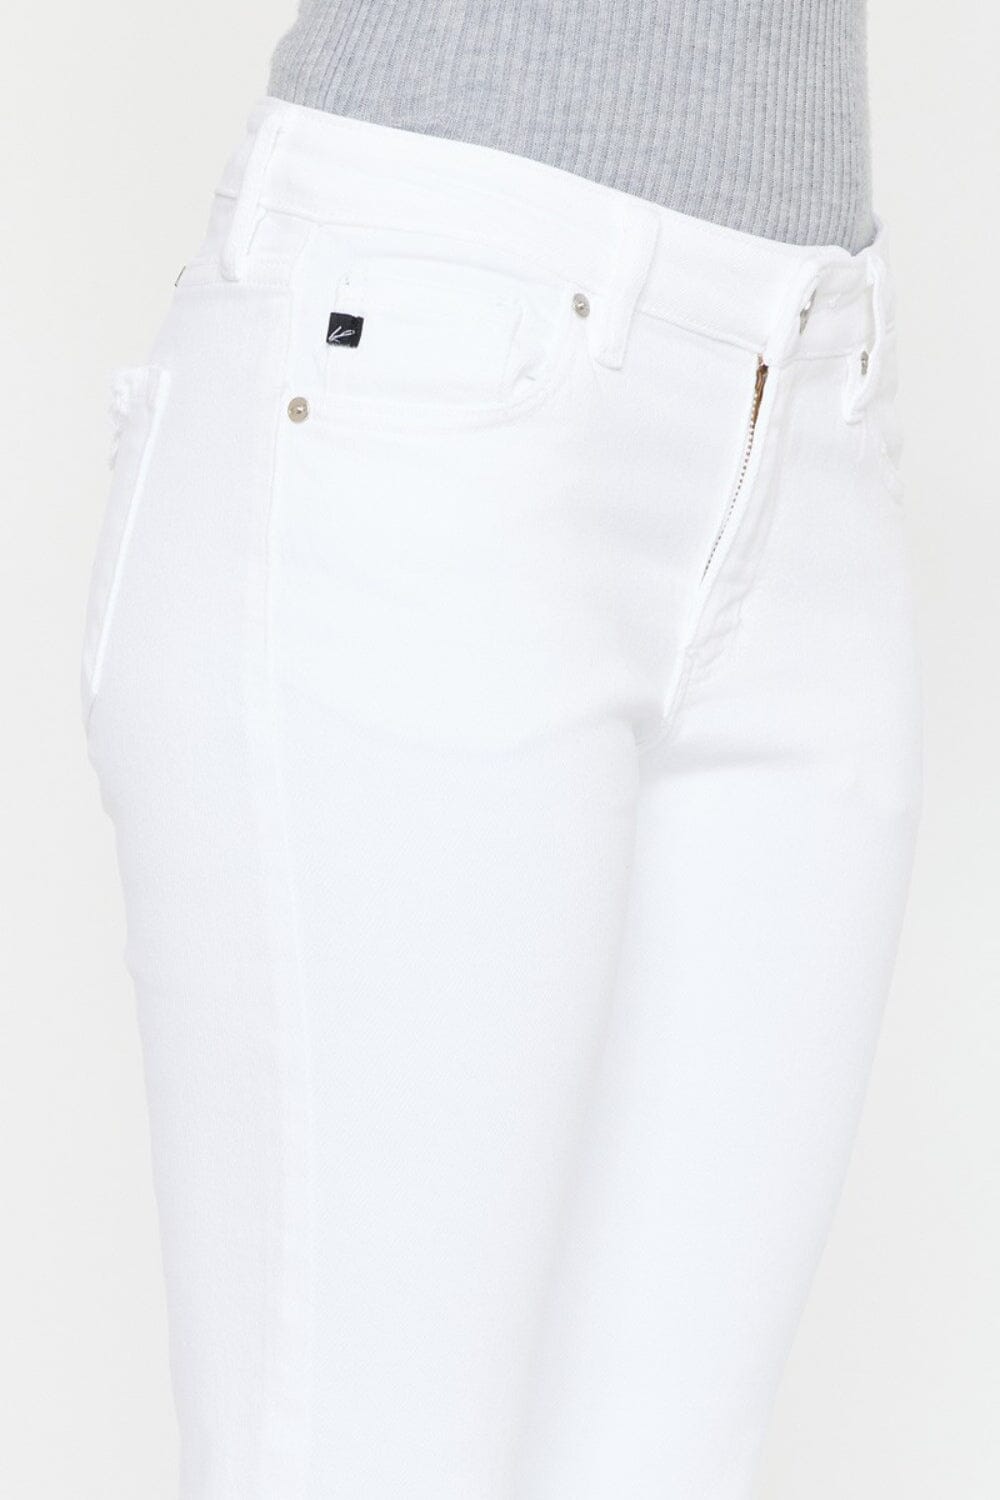 Kancan White Mid Rise Ankle Skinny Jeans jeans jehouze 